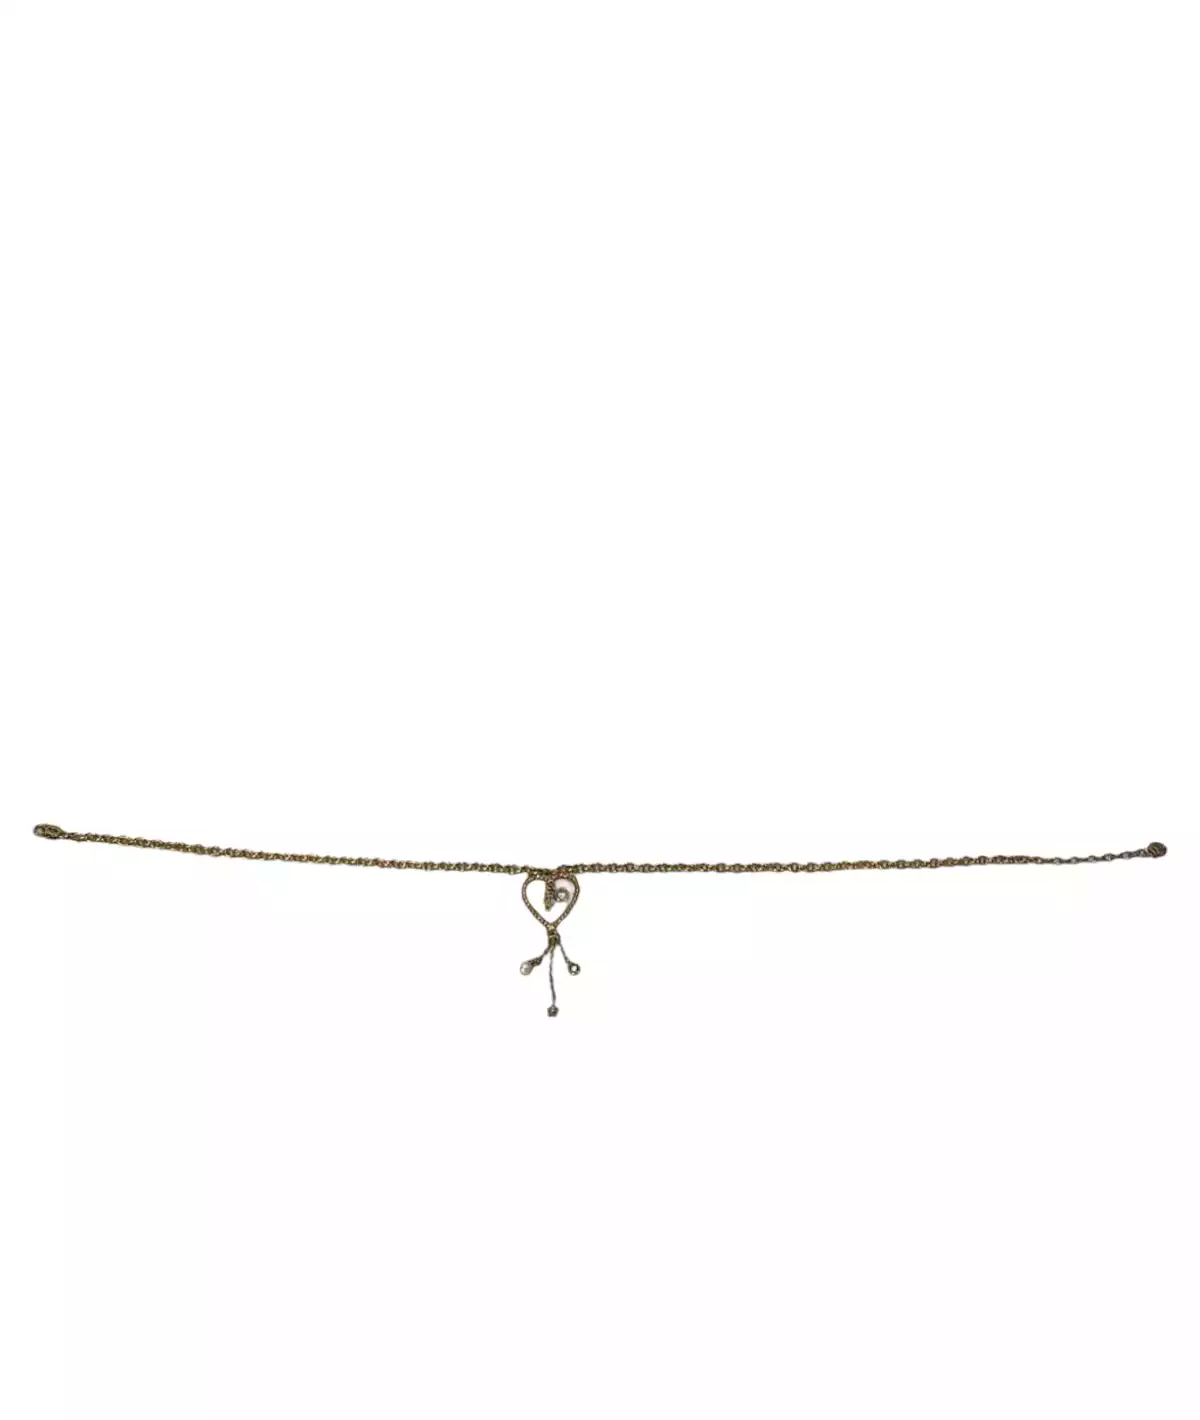 Necklace by Juicy Couture